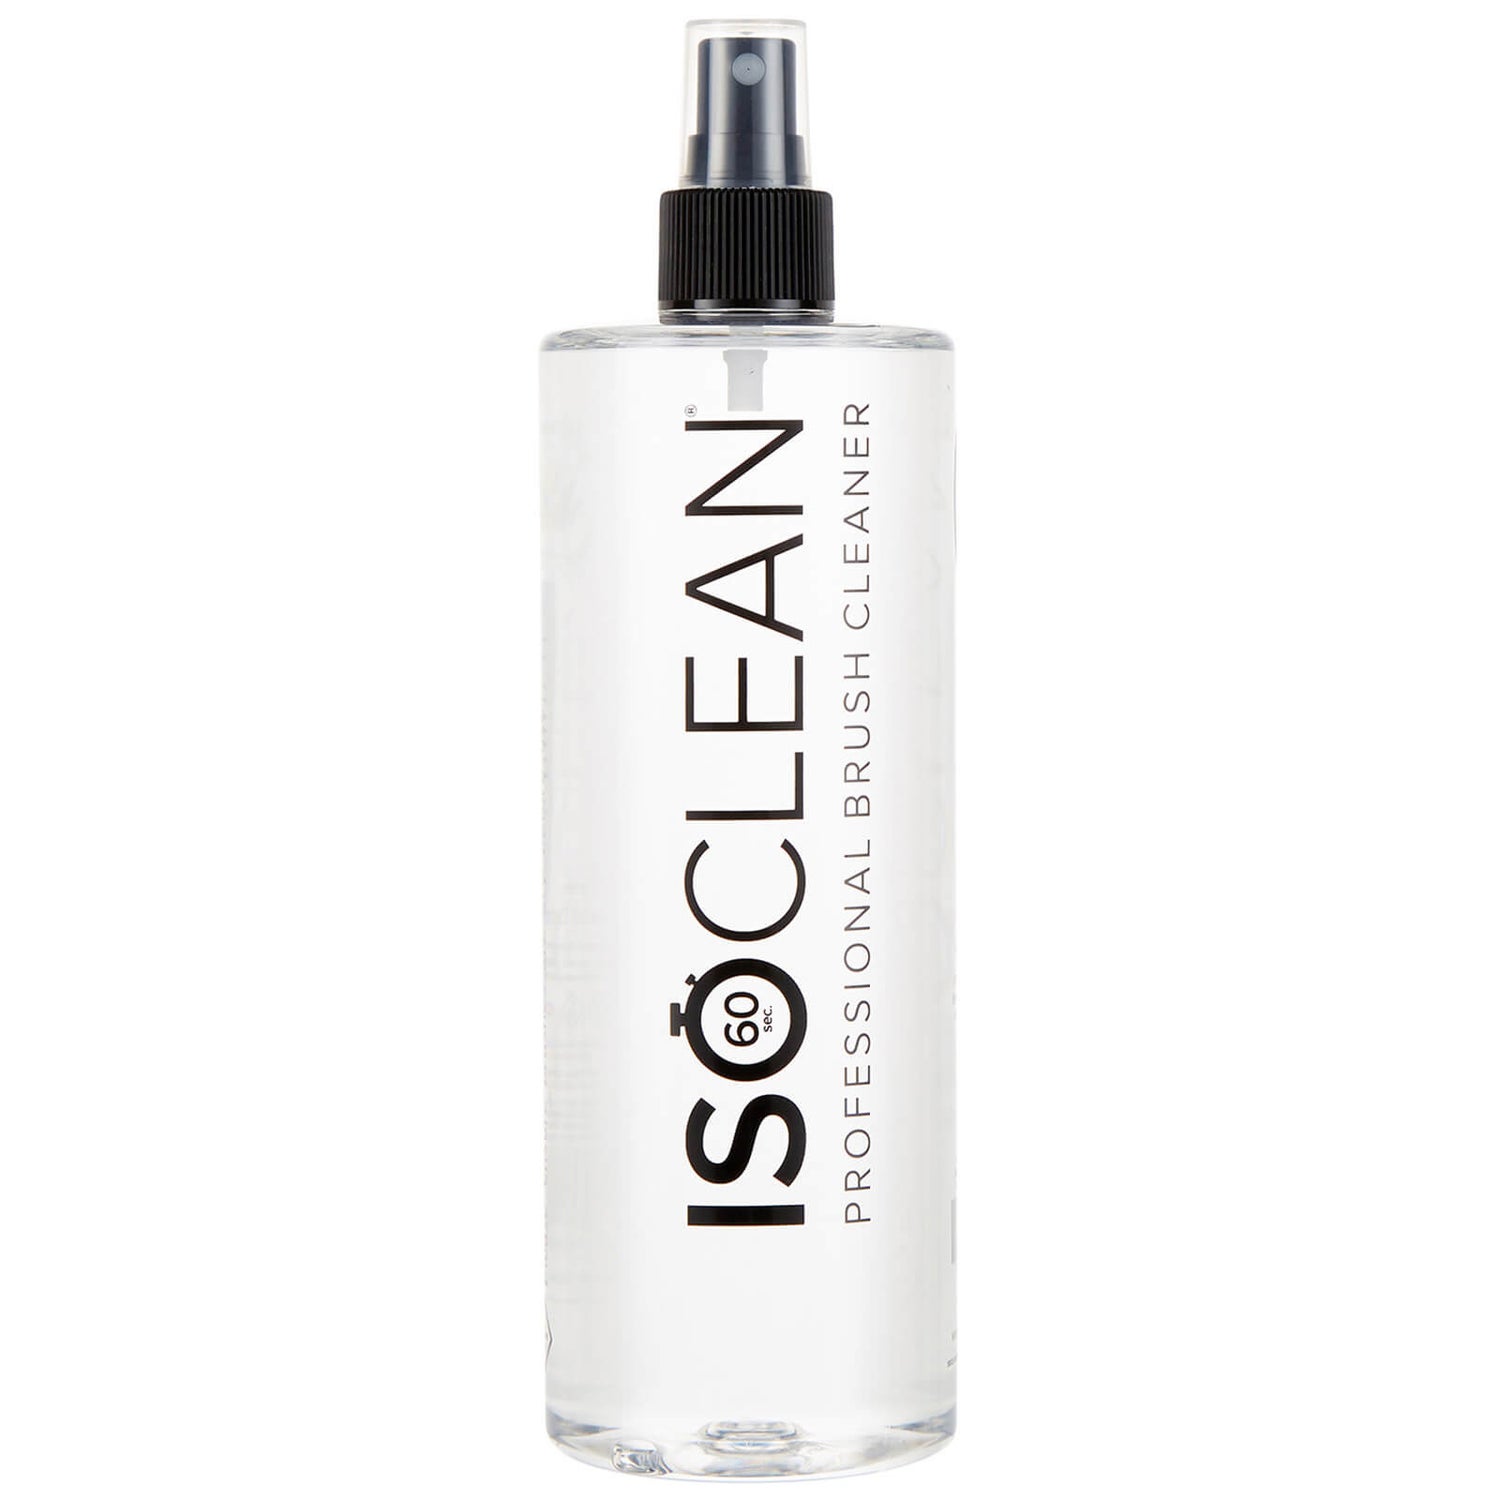 ISOCLEAN 'Enthusiast' Makeup Brush Cleaner with Spray Top 525ml